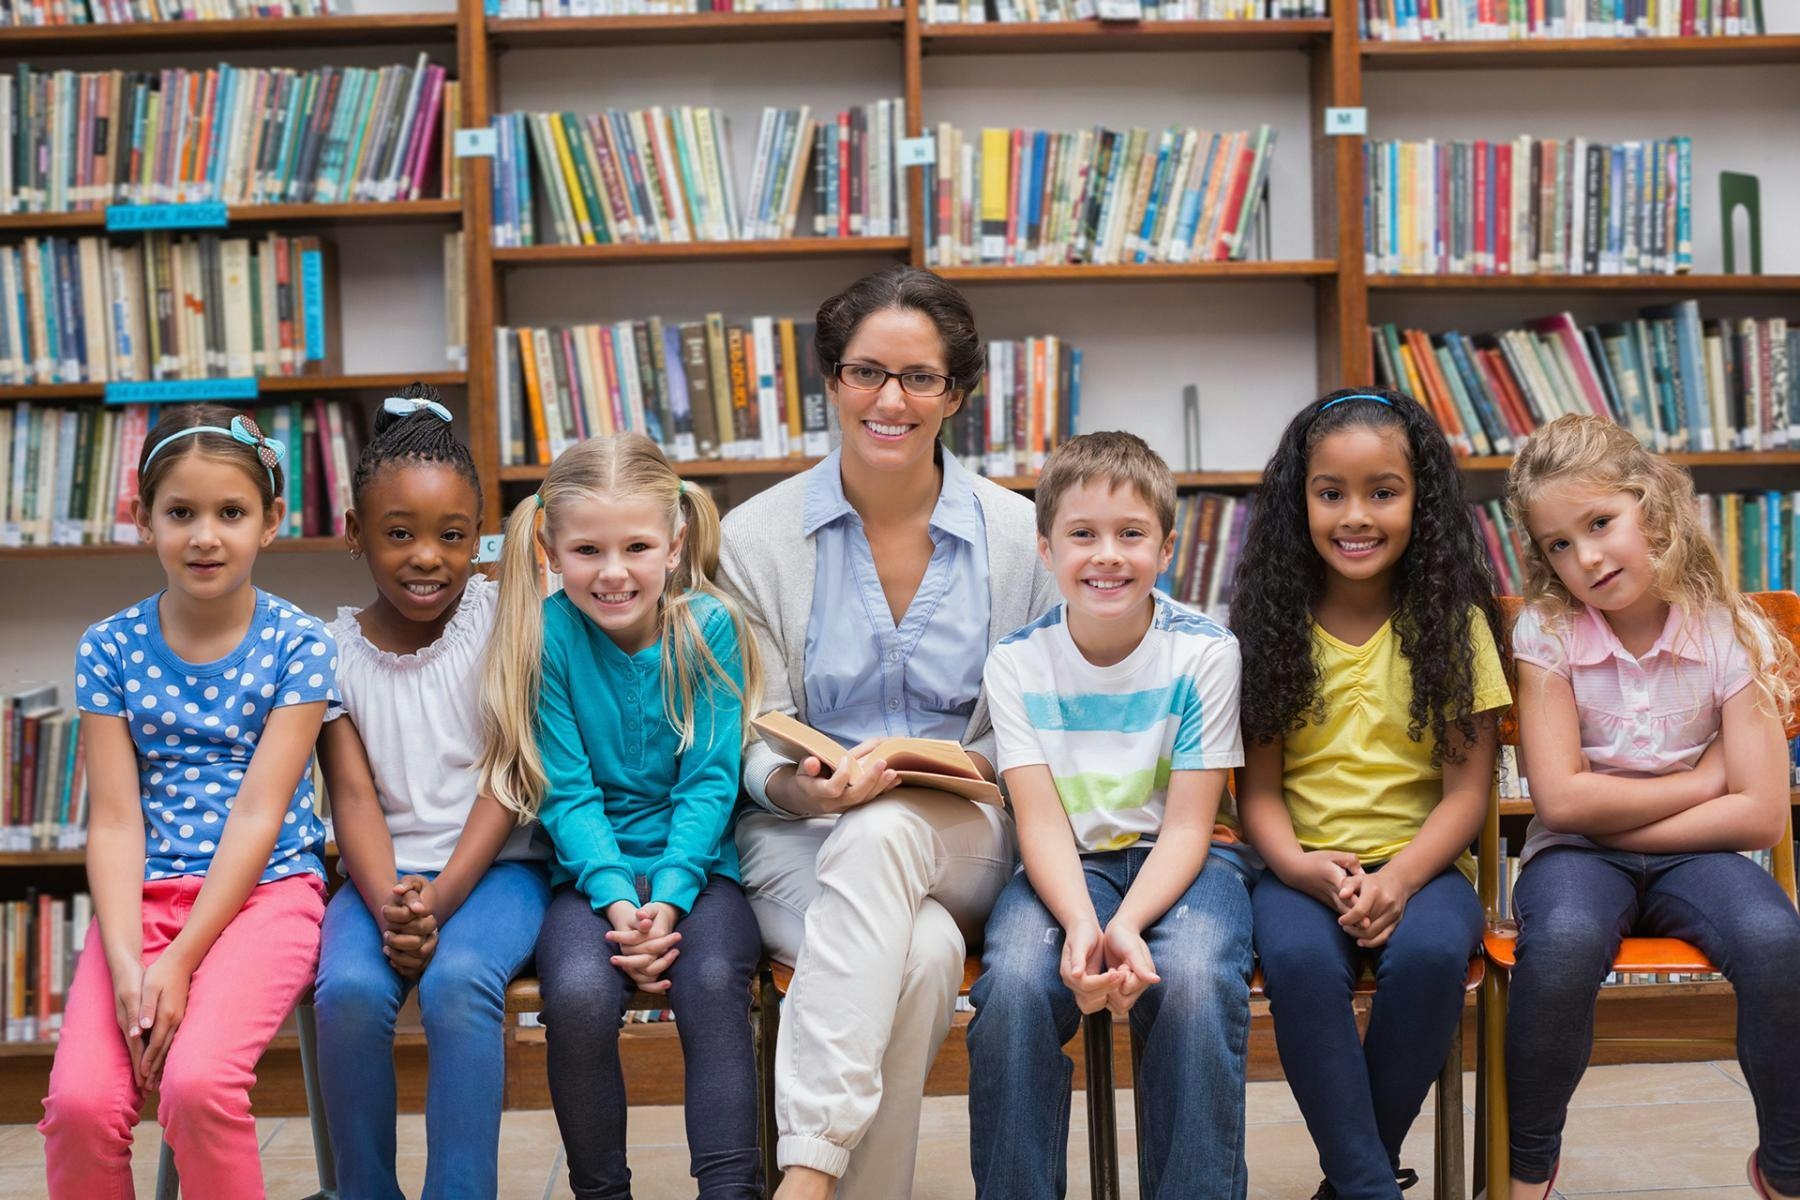 Teacher posing with her reading students in the library